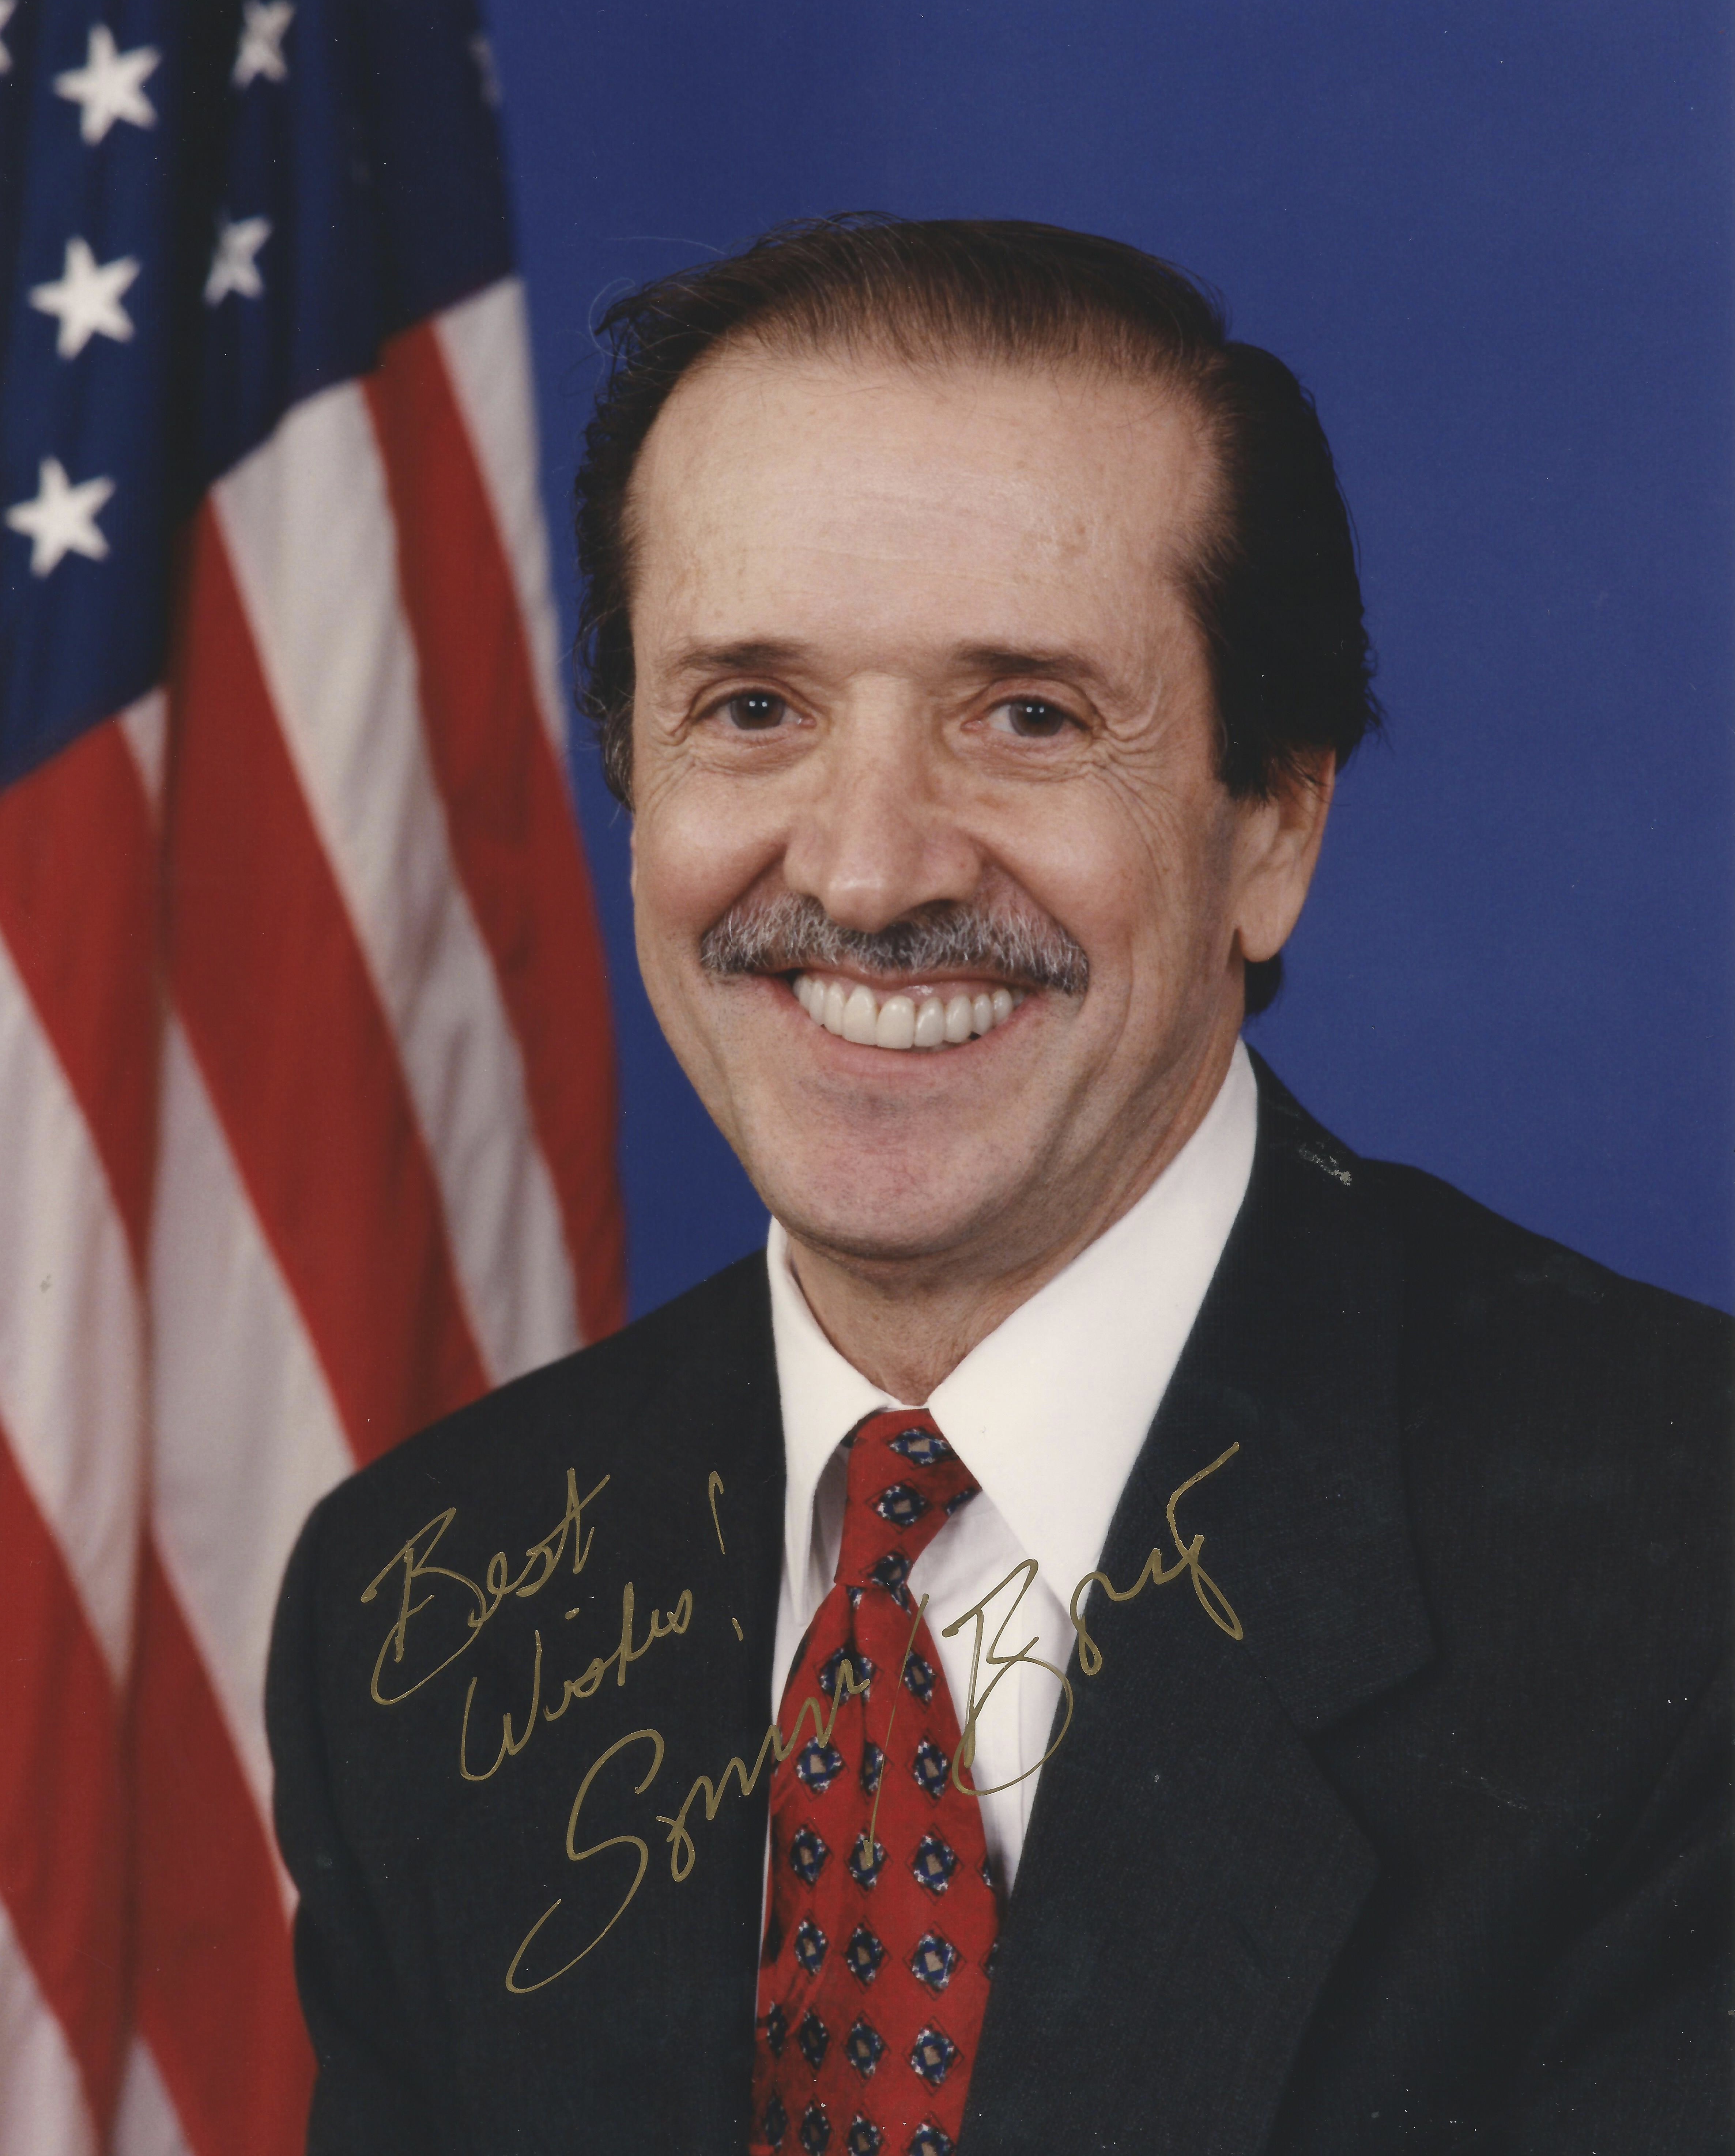 English: US Congressional picture of Sonny Bono